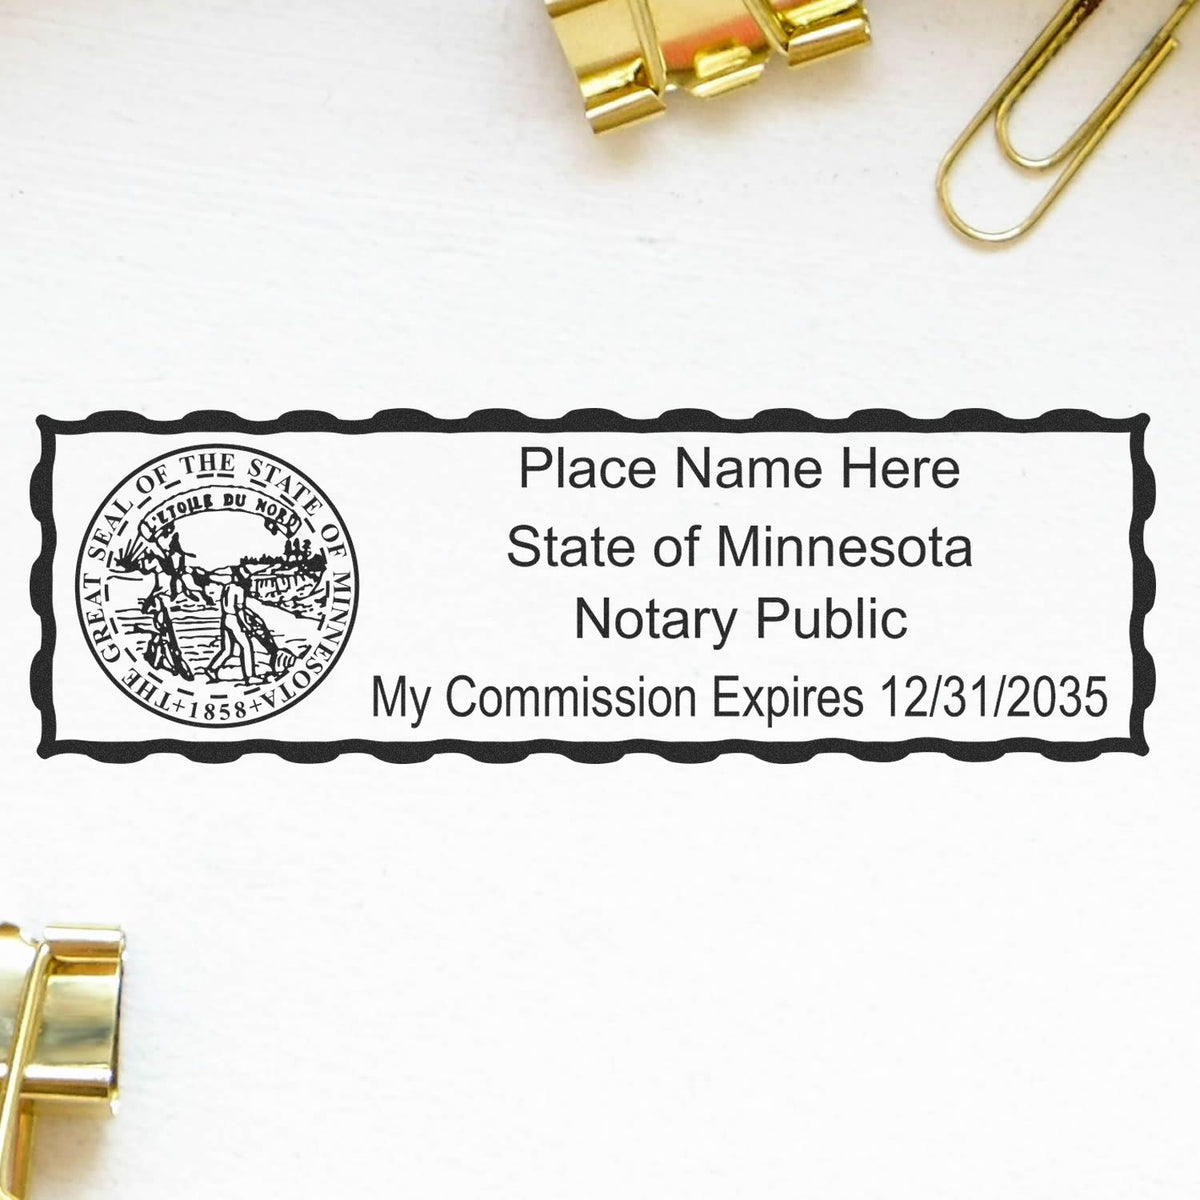 The Slim Pre-Inked State Seal Notary Stamp for Minnesota stamp impression comes to life with a crisp, detailed photo on paper - showcasing true professional quality.